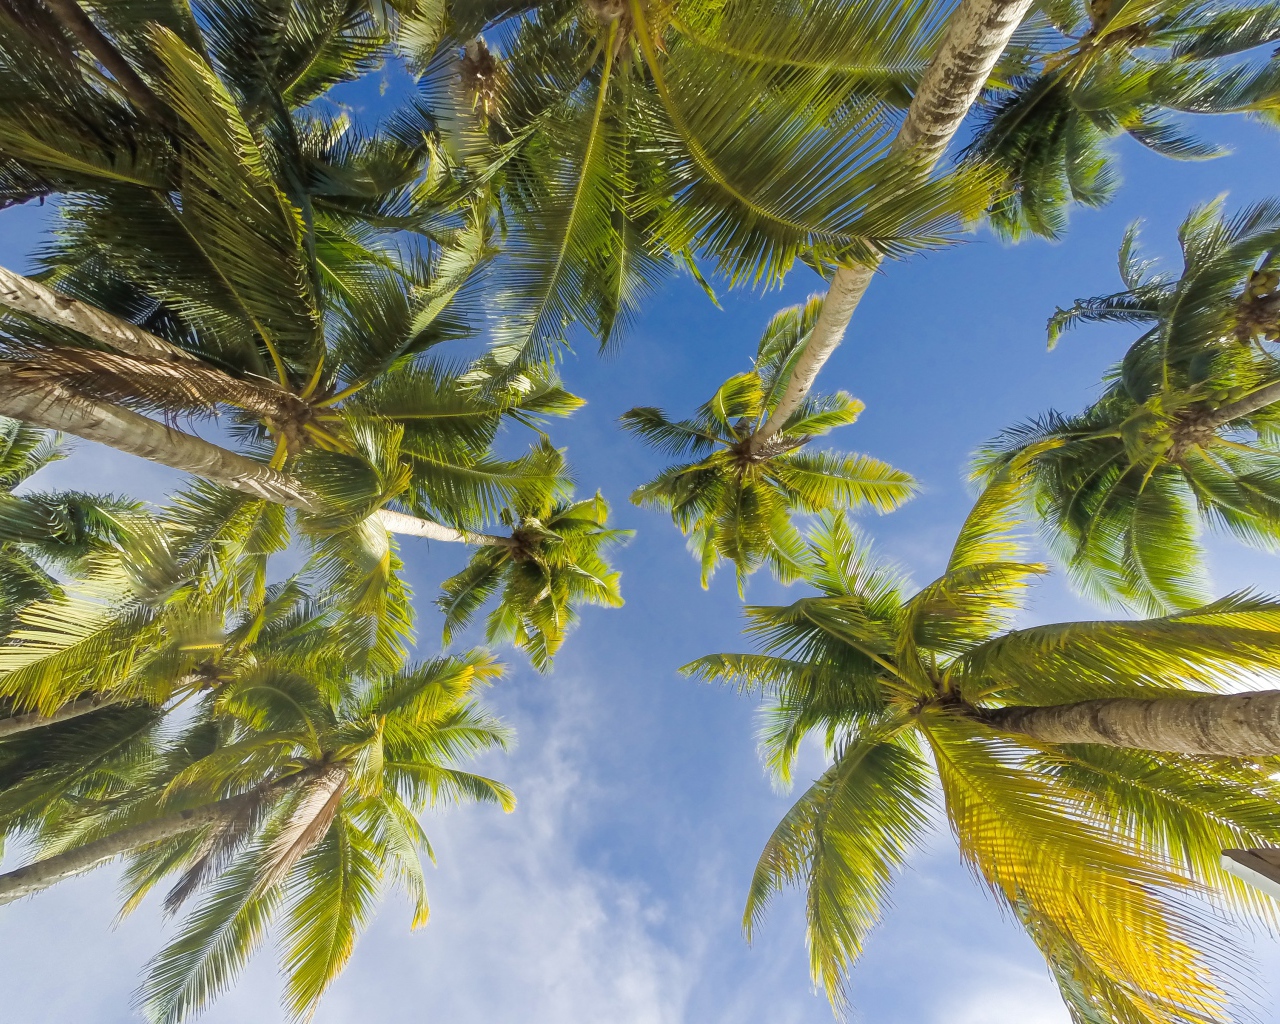 Bottom view of green leaves of palm tree under blue sky